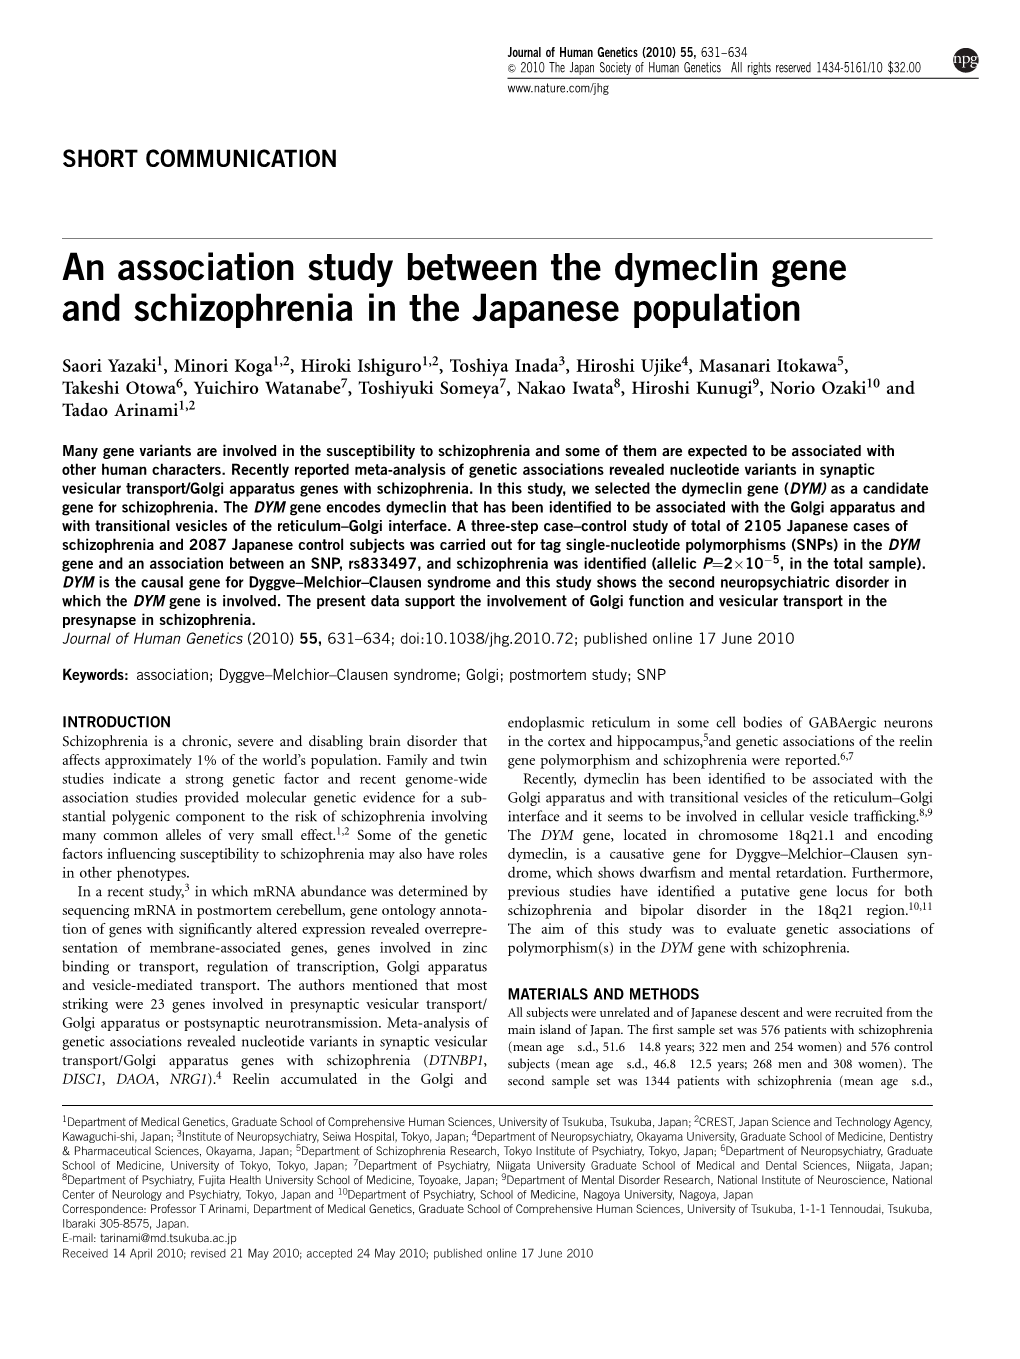 An Association Study Between the Dymeclin Gene and Schizophrenia in the Japanese Population